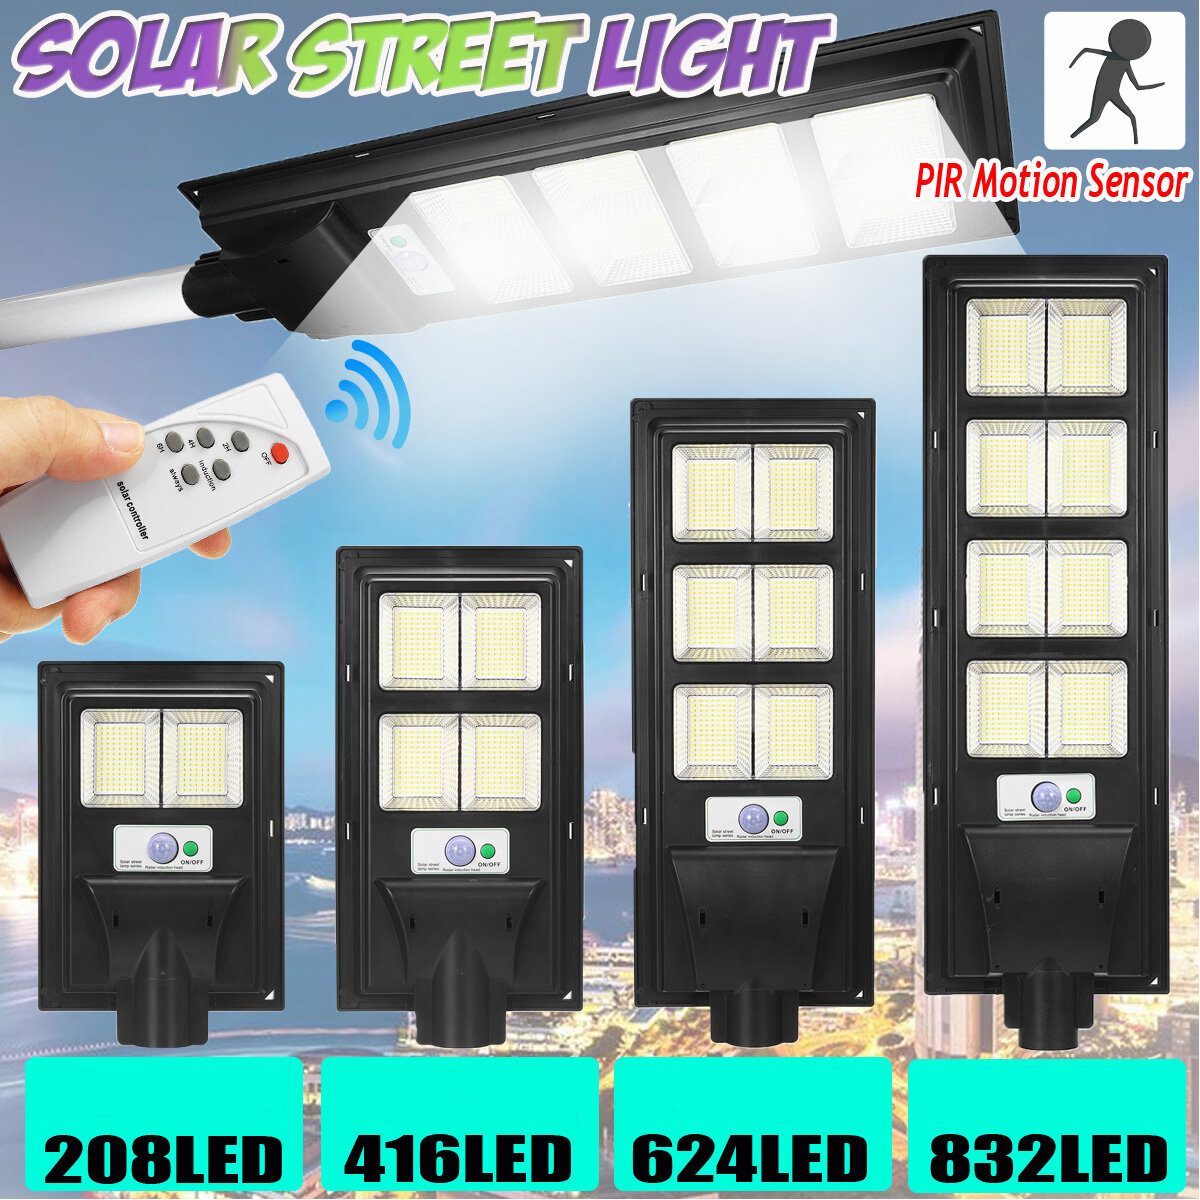 208/416/624/832LED Solar Powered Wall Street Light PIR Motion Sensor Dimmable Lamp + Remote Control